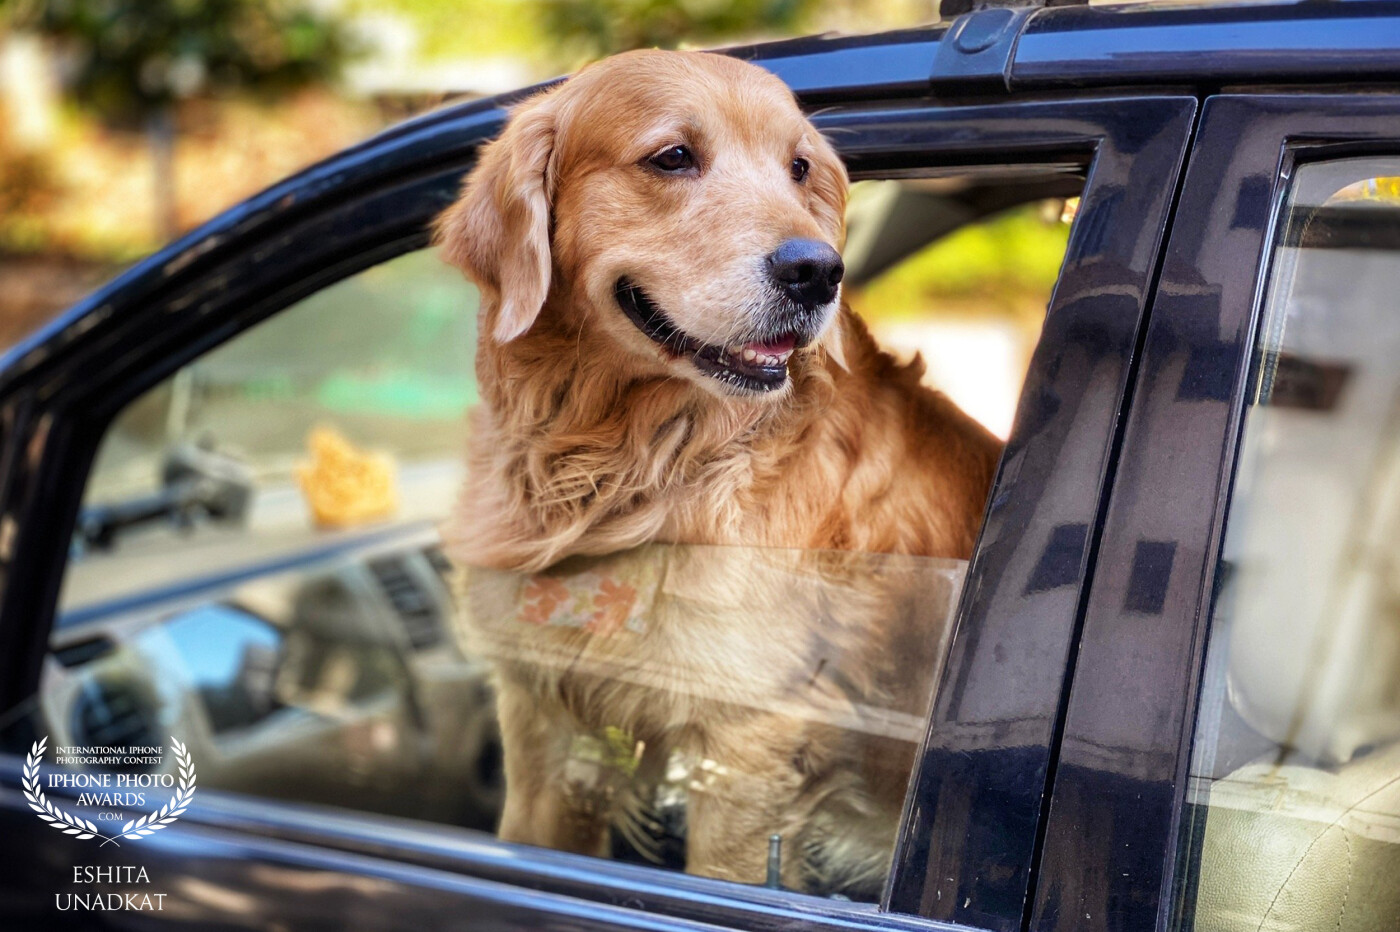 Reggie’s Day Out! <br />
A portrait of Reggie the golden retriever popping his head out of the window of a car!